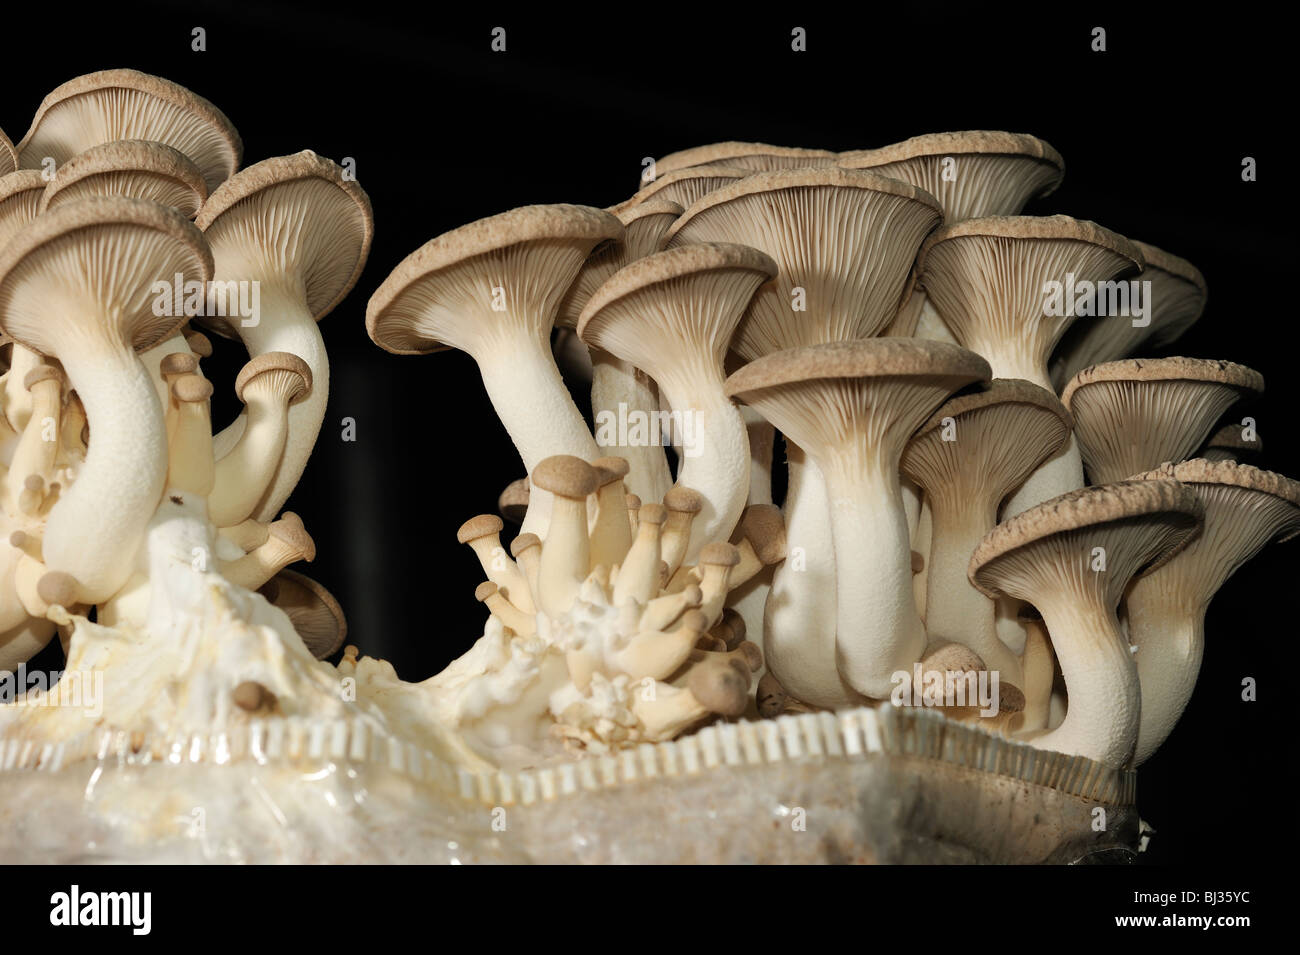 Cultivation of king trumpet or king oyster mushrooms indoors Stock Photo